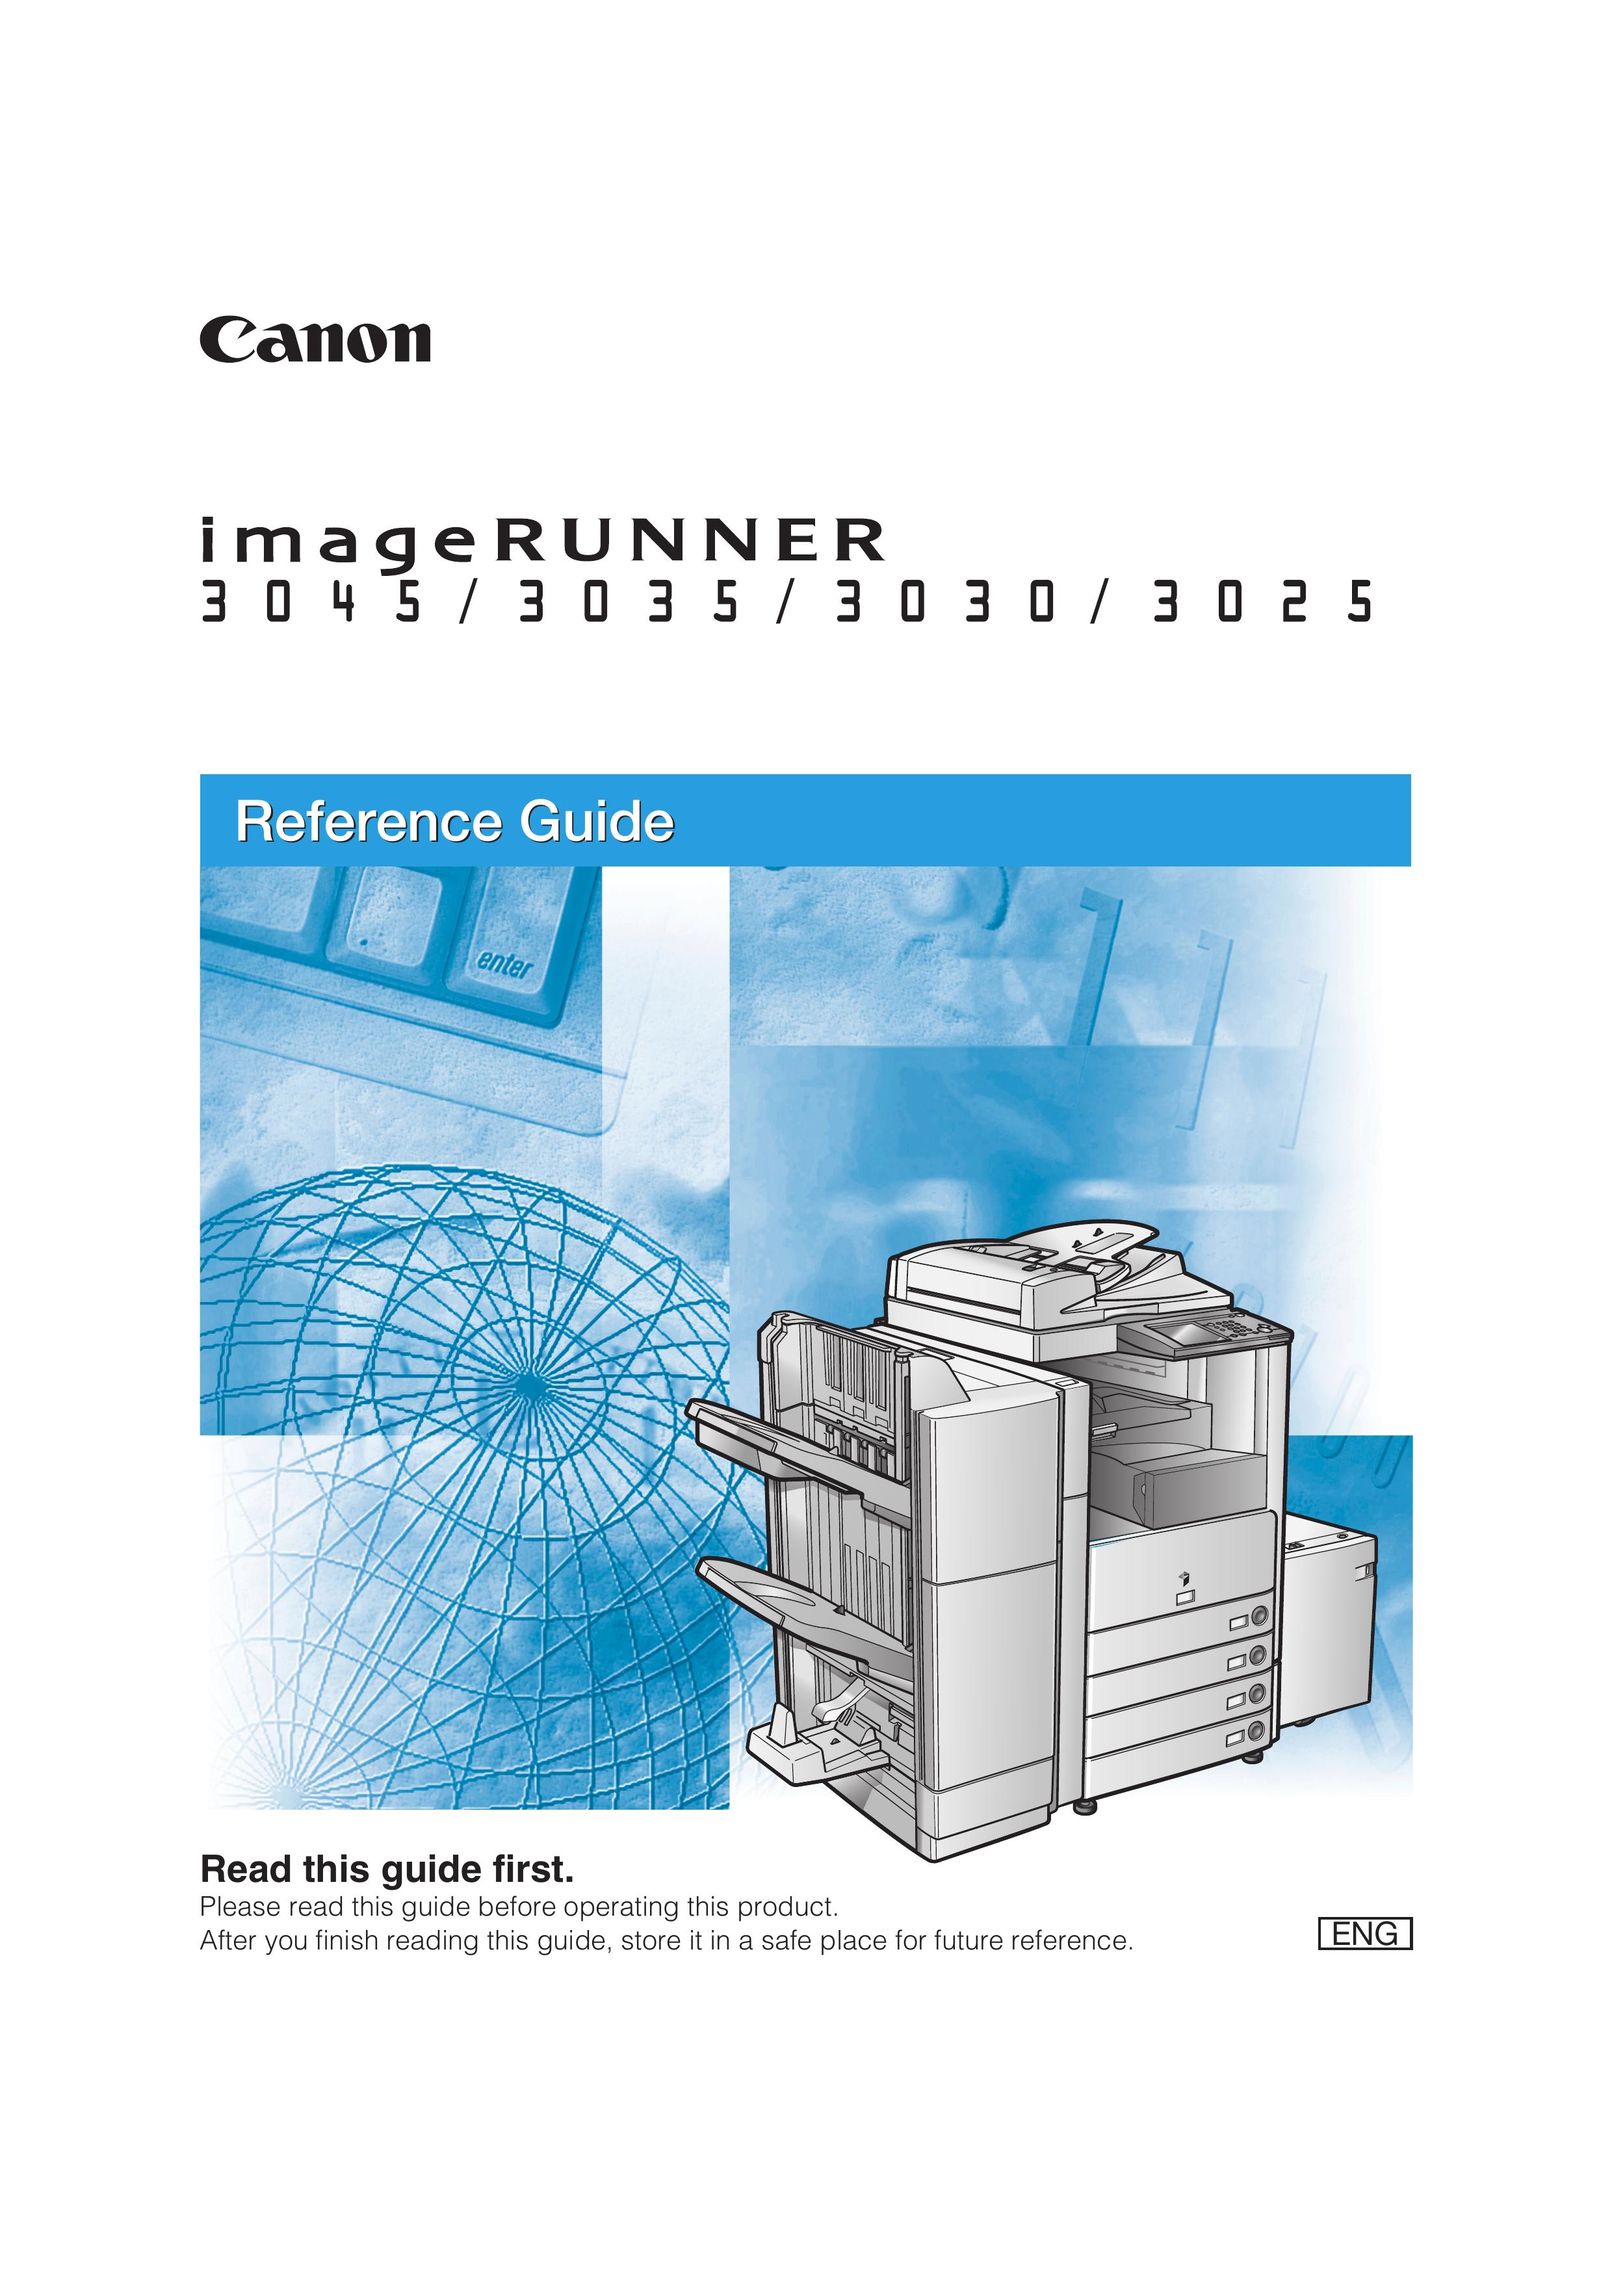 Canon 3025 All in One Printer User Manual